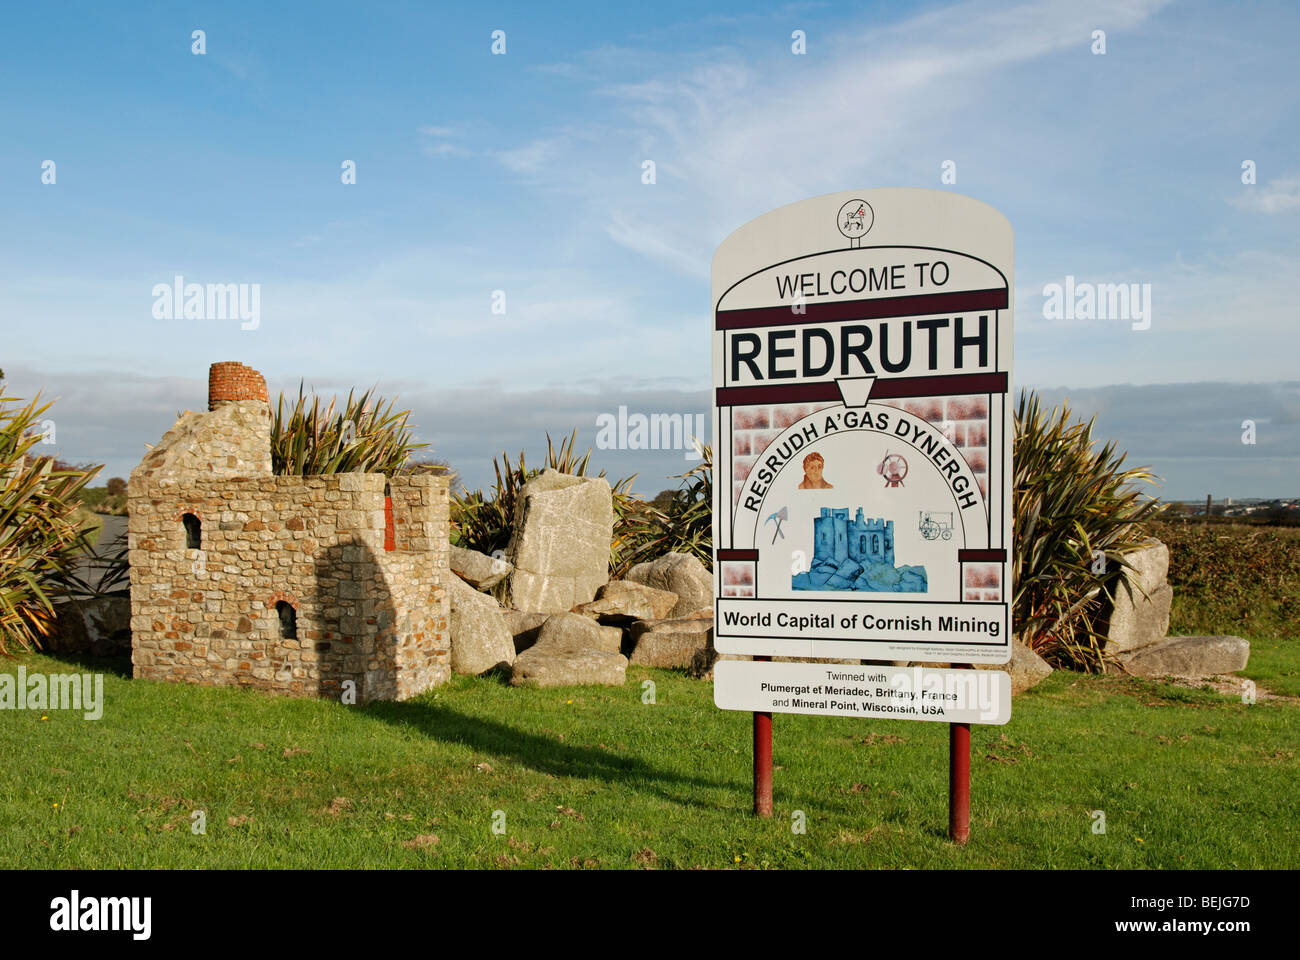 welcome sign on the outskirts of redruth in cornwall, uk Stock Photo